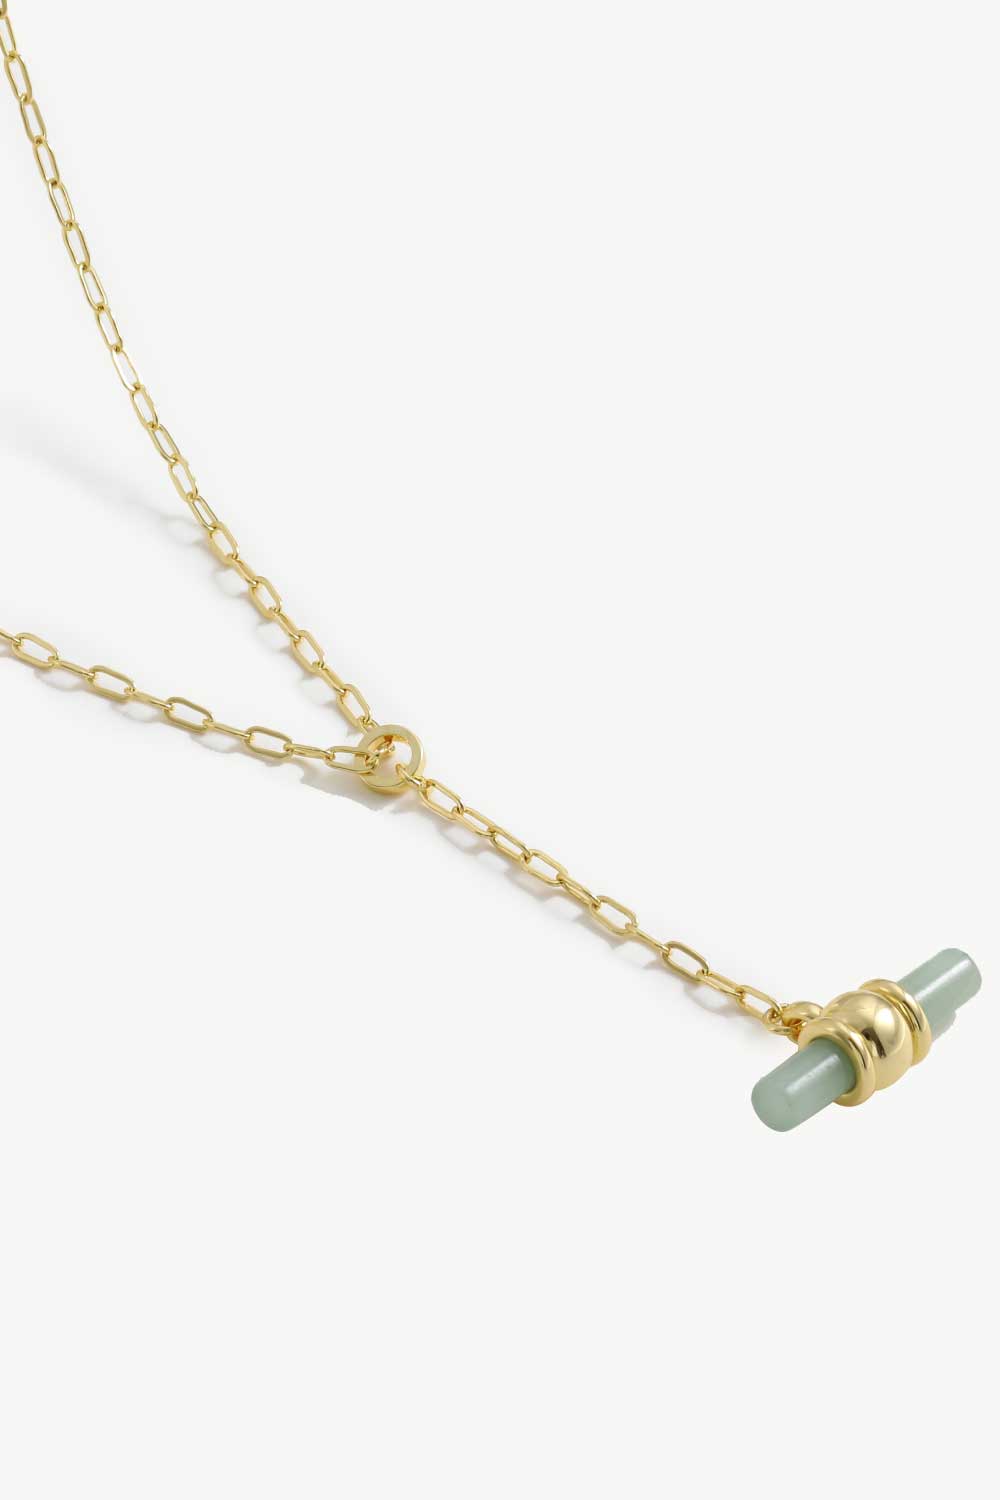 Gold-Plated Bar Pendant OT Chain Necklace - Necklaces - FITGGINS